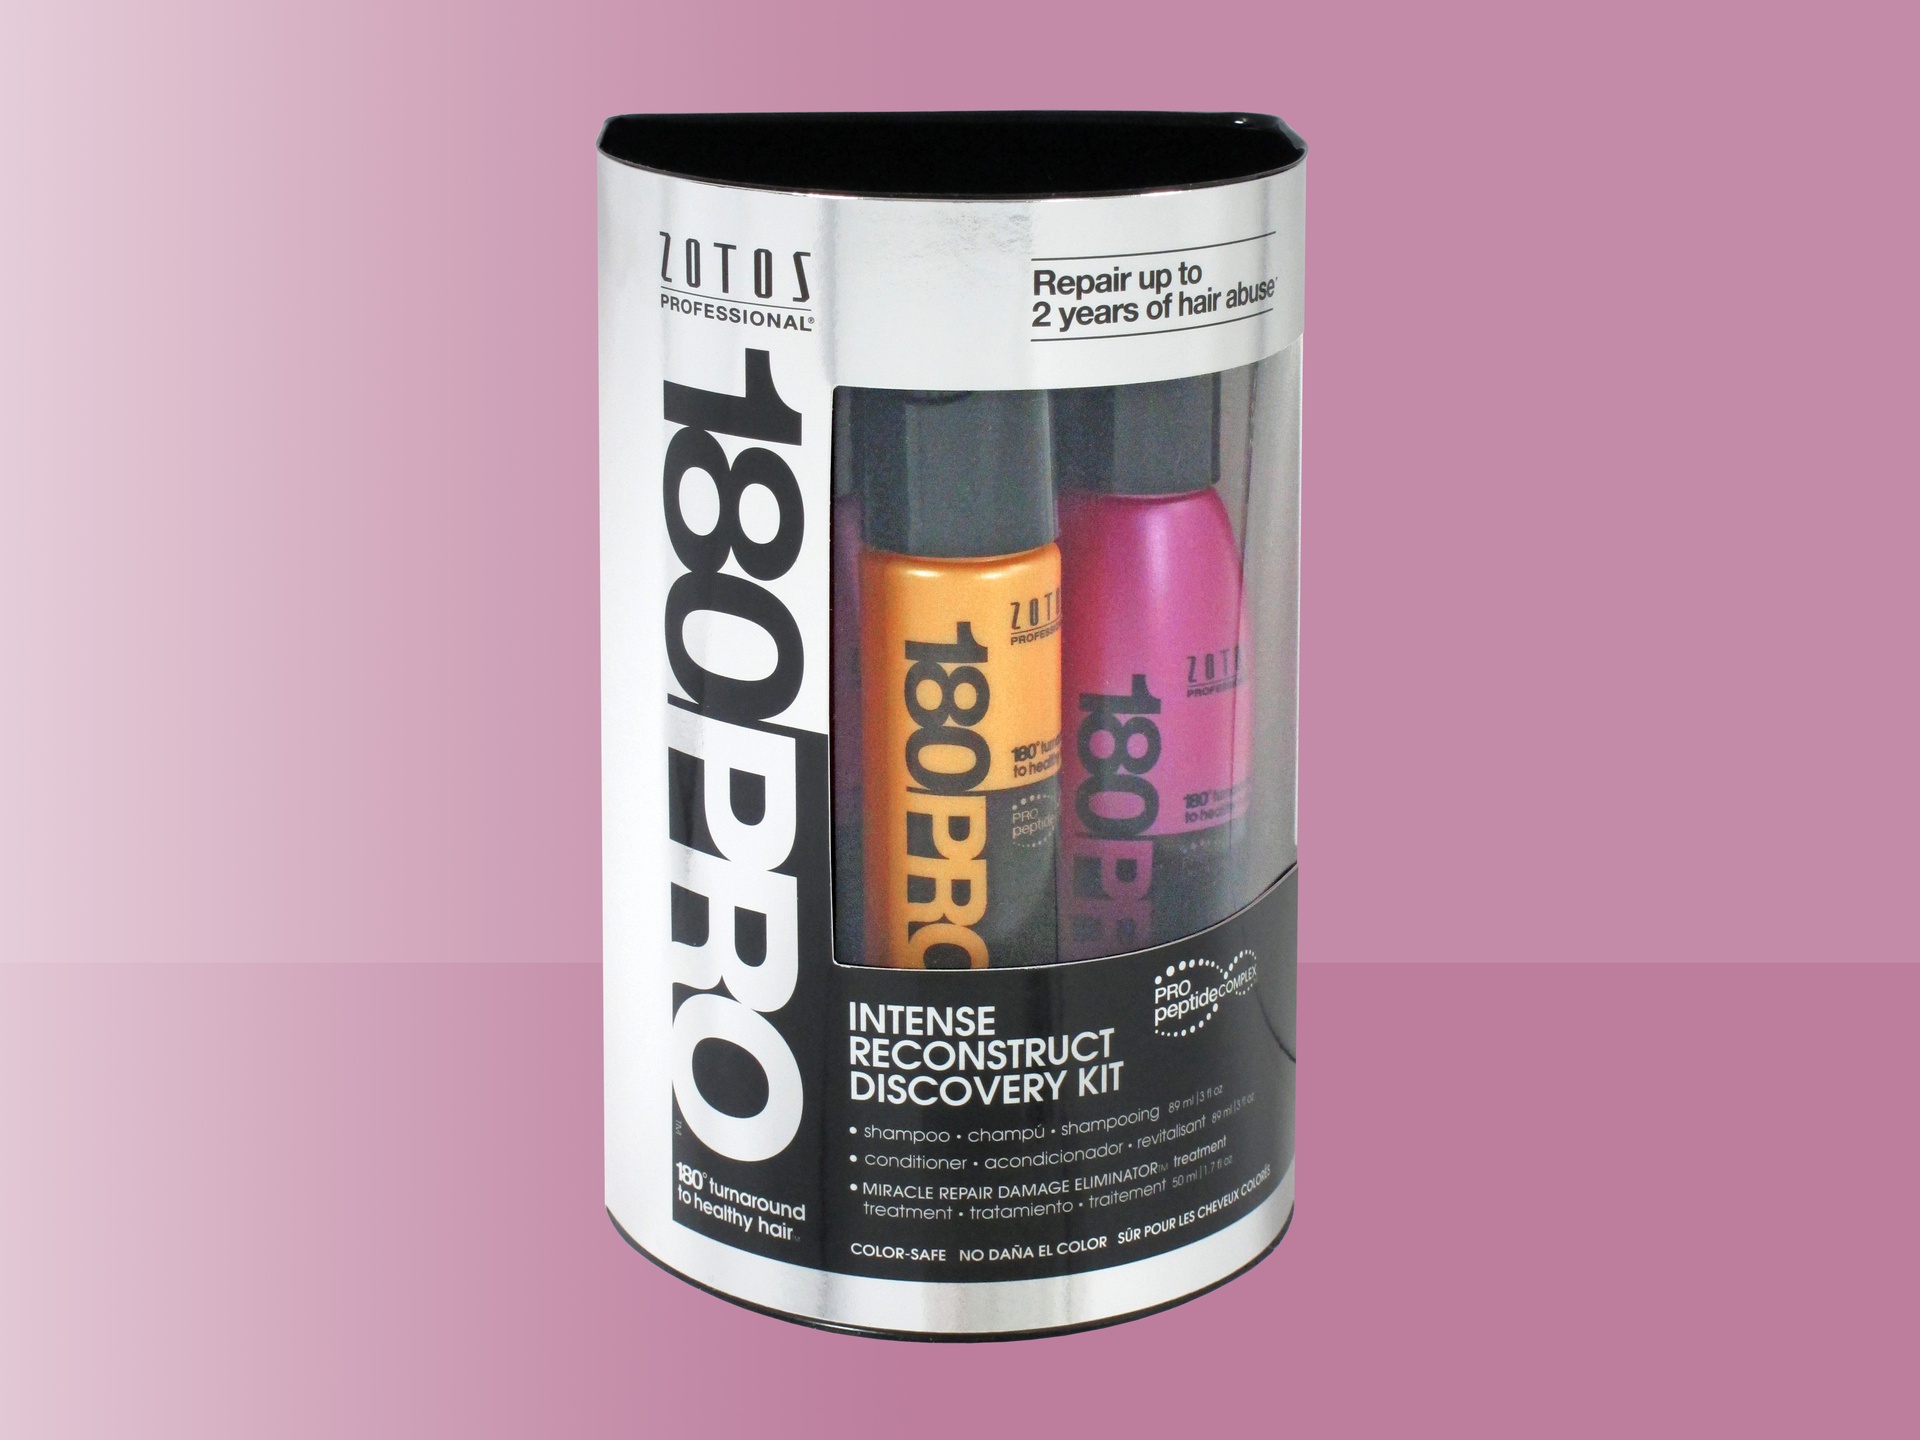 Zotos Professional’s 180PRO Discovery Kit packaging